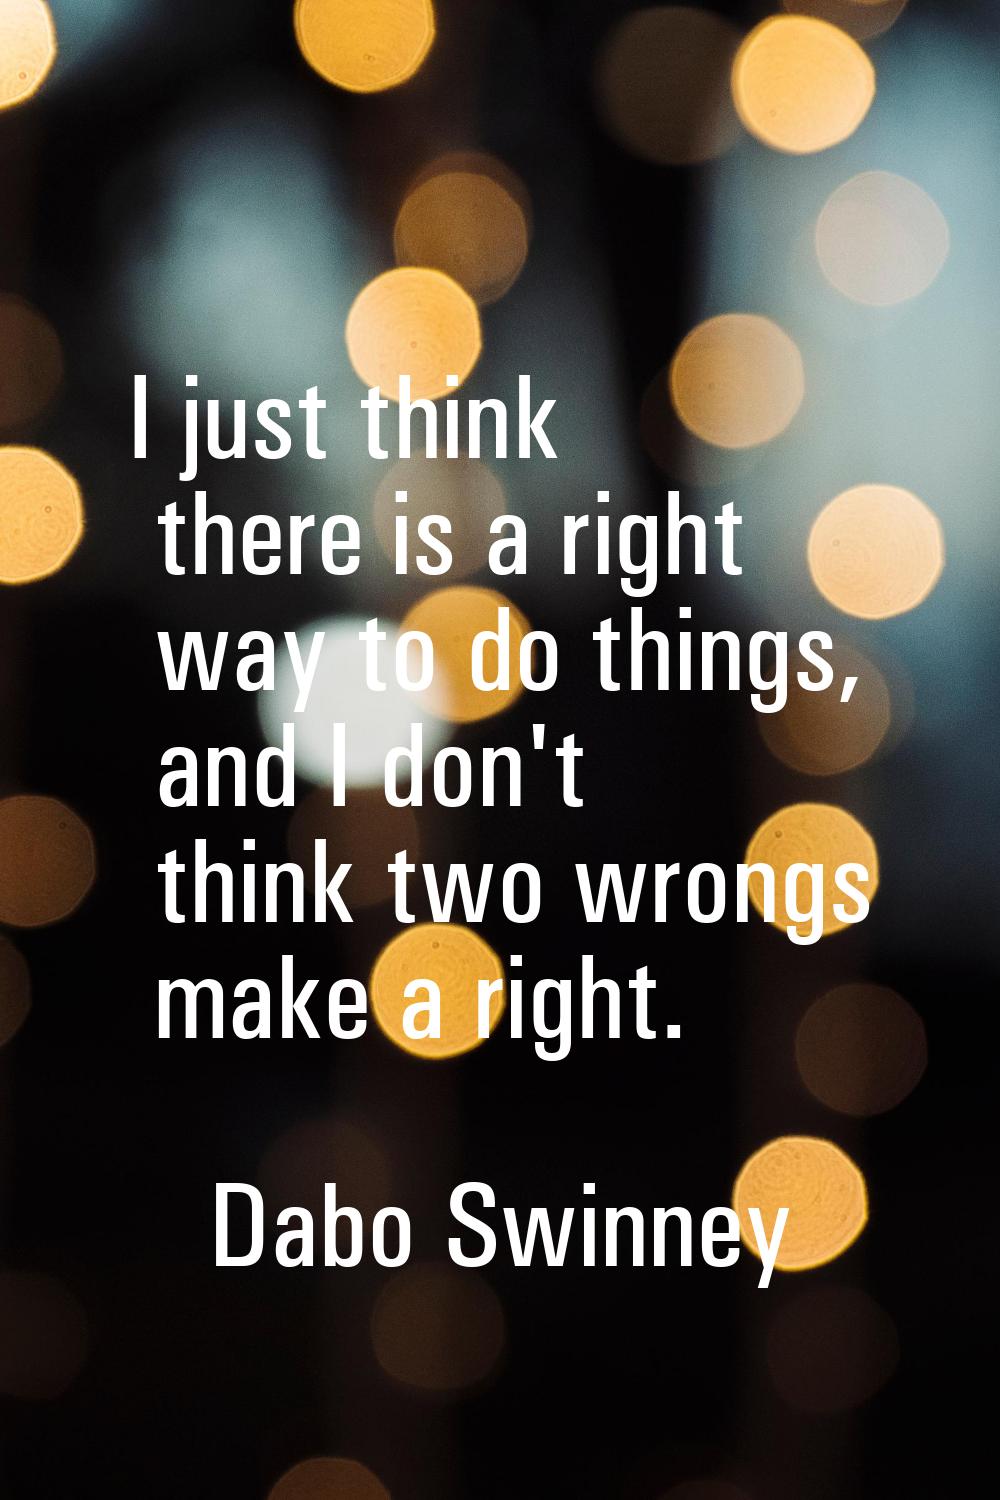 I just think there is a right way to do things, and I don't think two wrongs make a right.